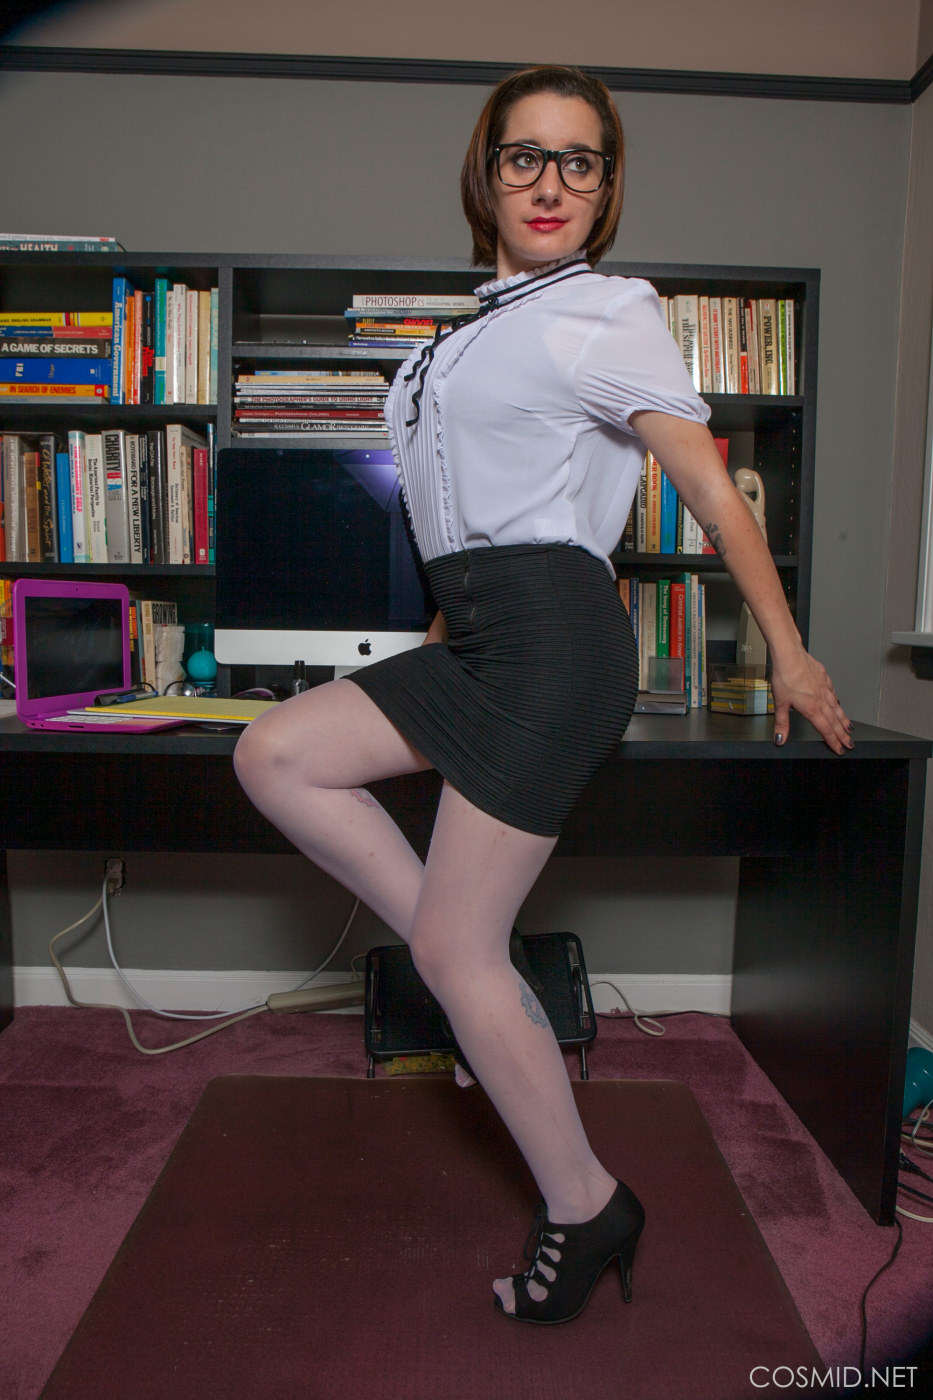 Chelsea Bell - a secretary - 22-0022 from Cosmid